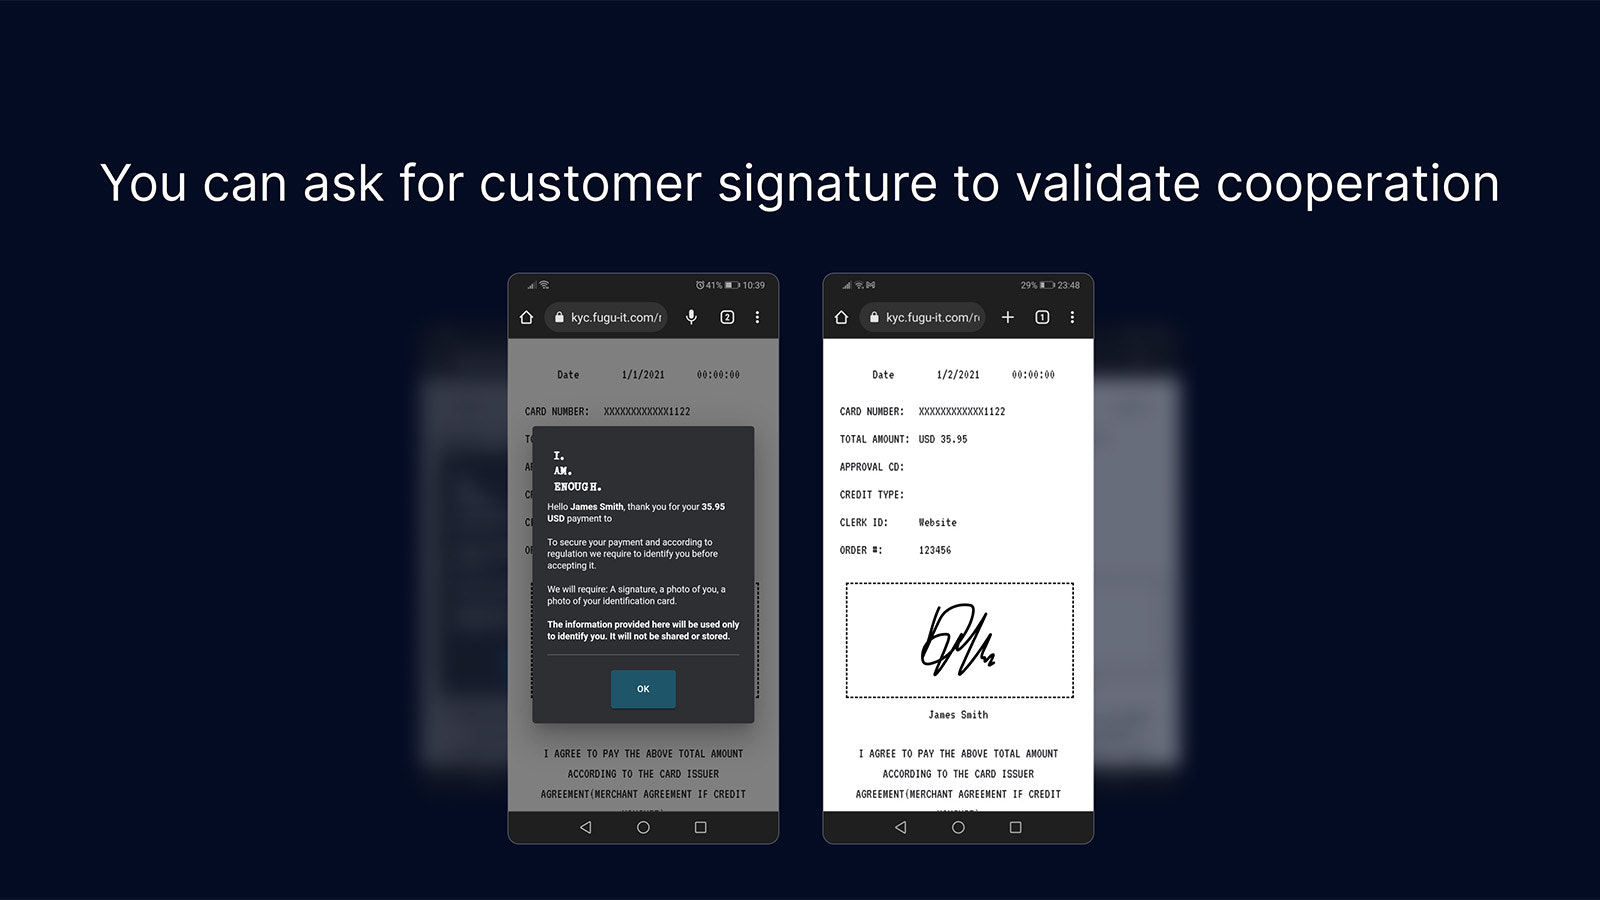 When needed, ask for a signature, gauging customer cooperation